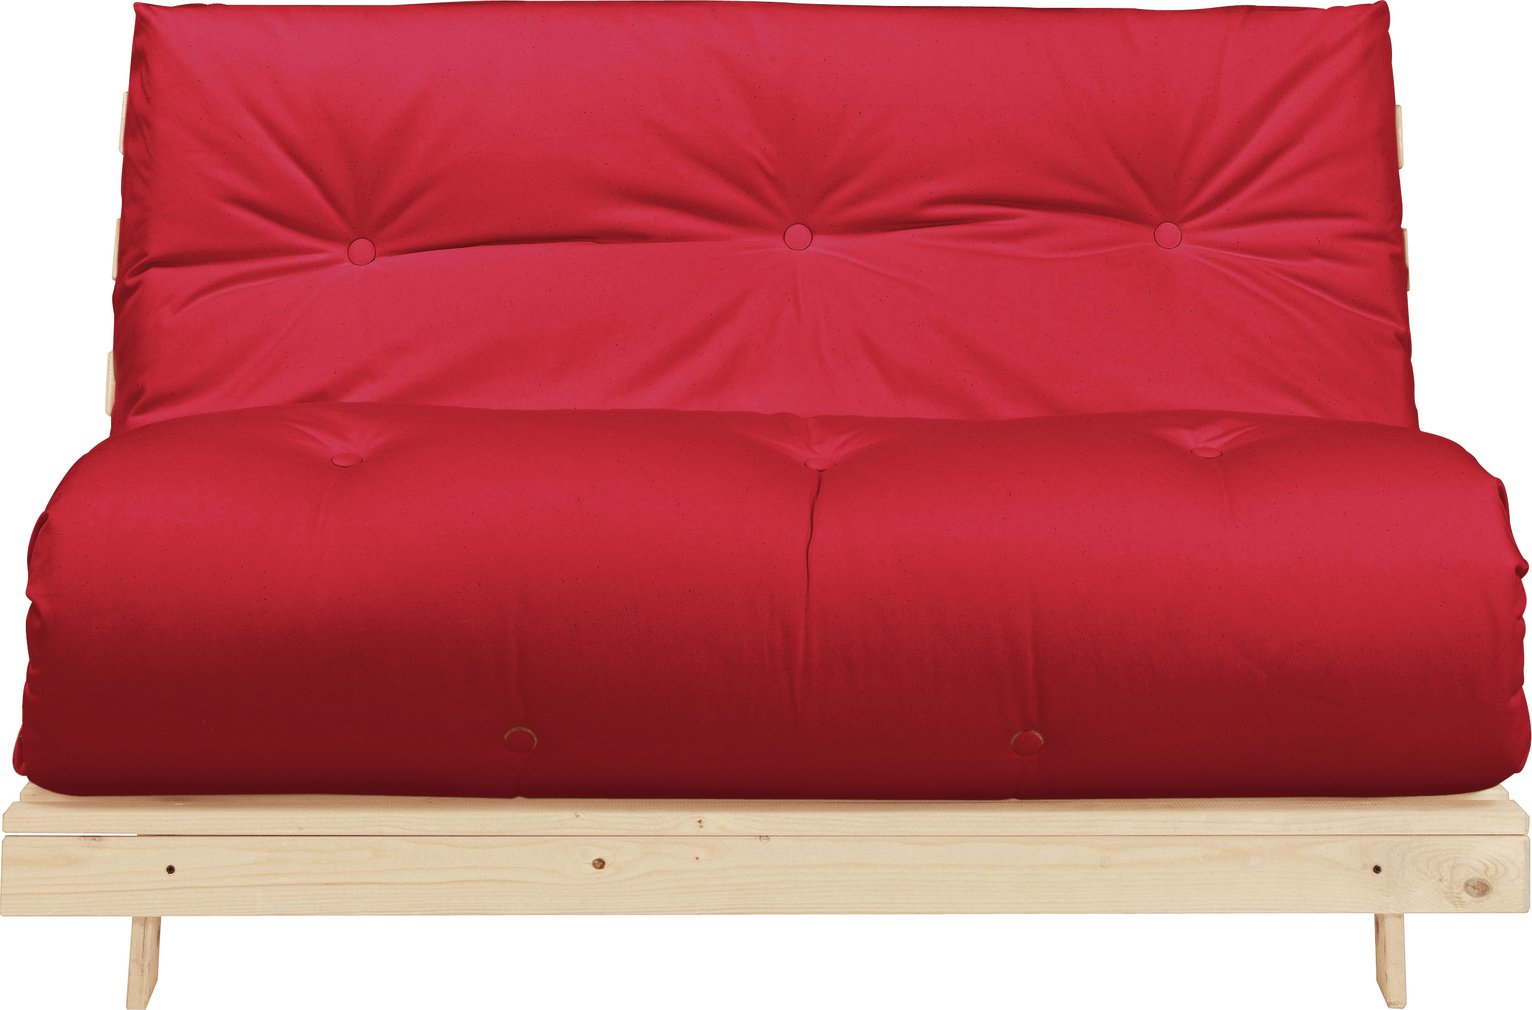 Argos Home Tosa 2 Seater Futon Sofa Bed - Red